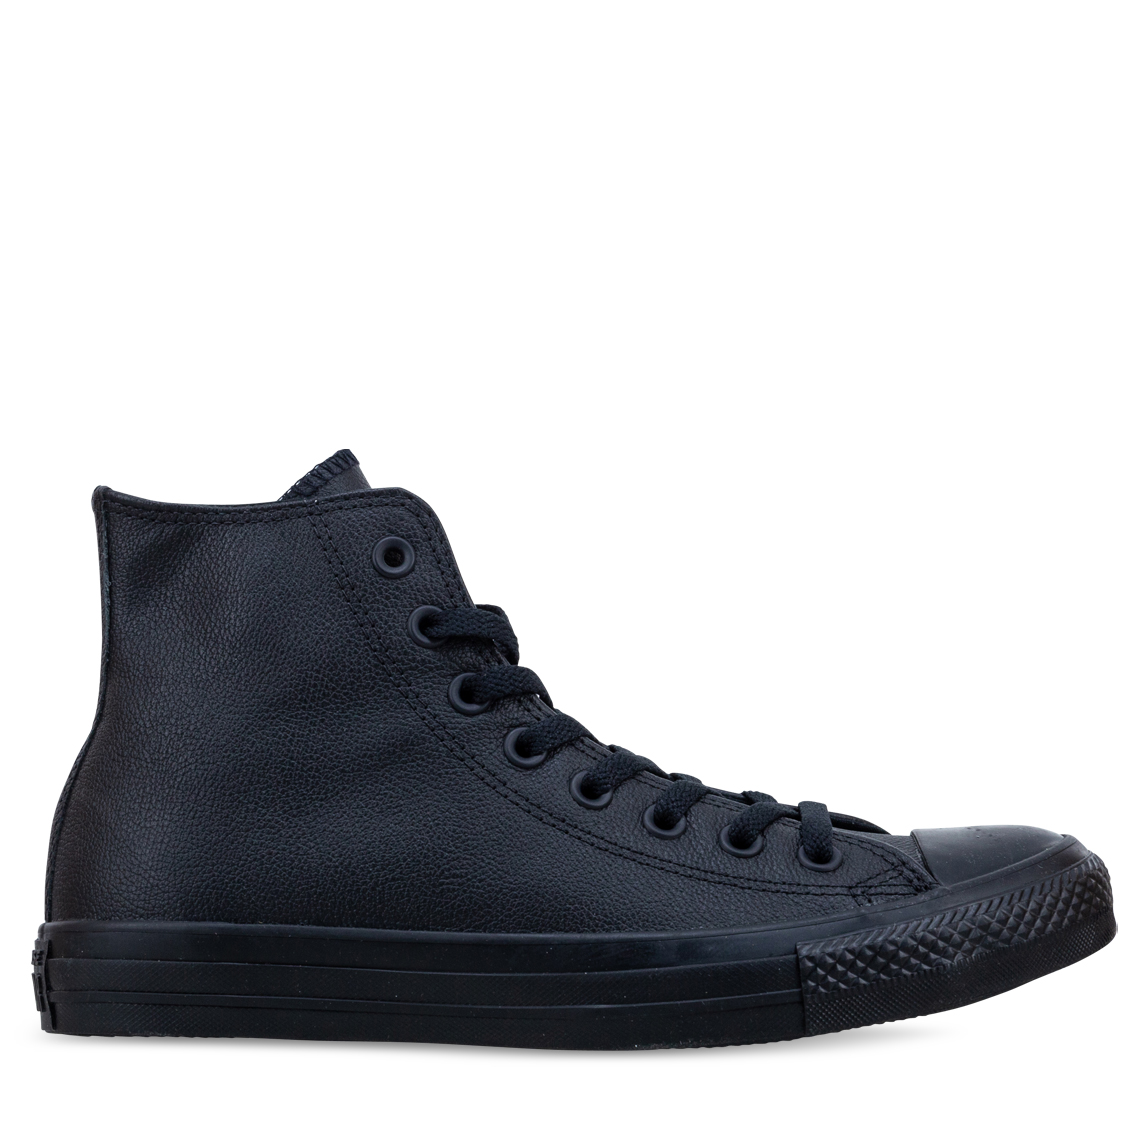 Converse All Star High Leather Black | Hype DC